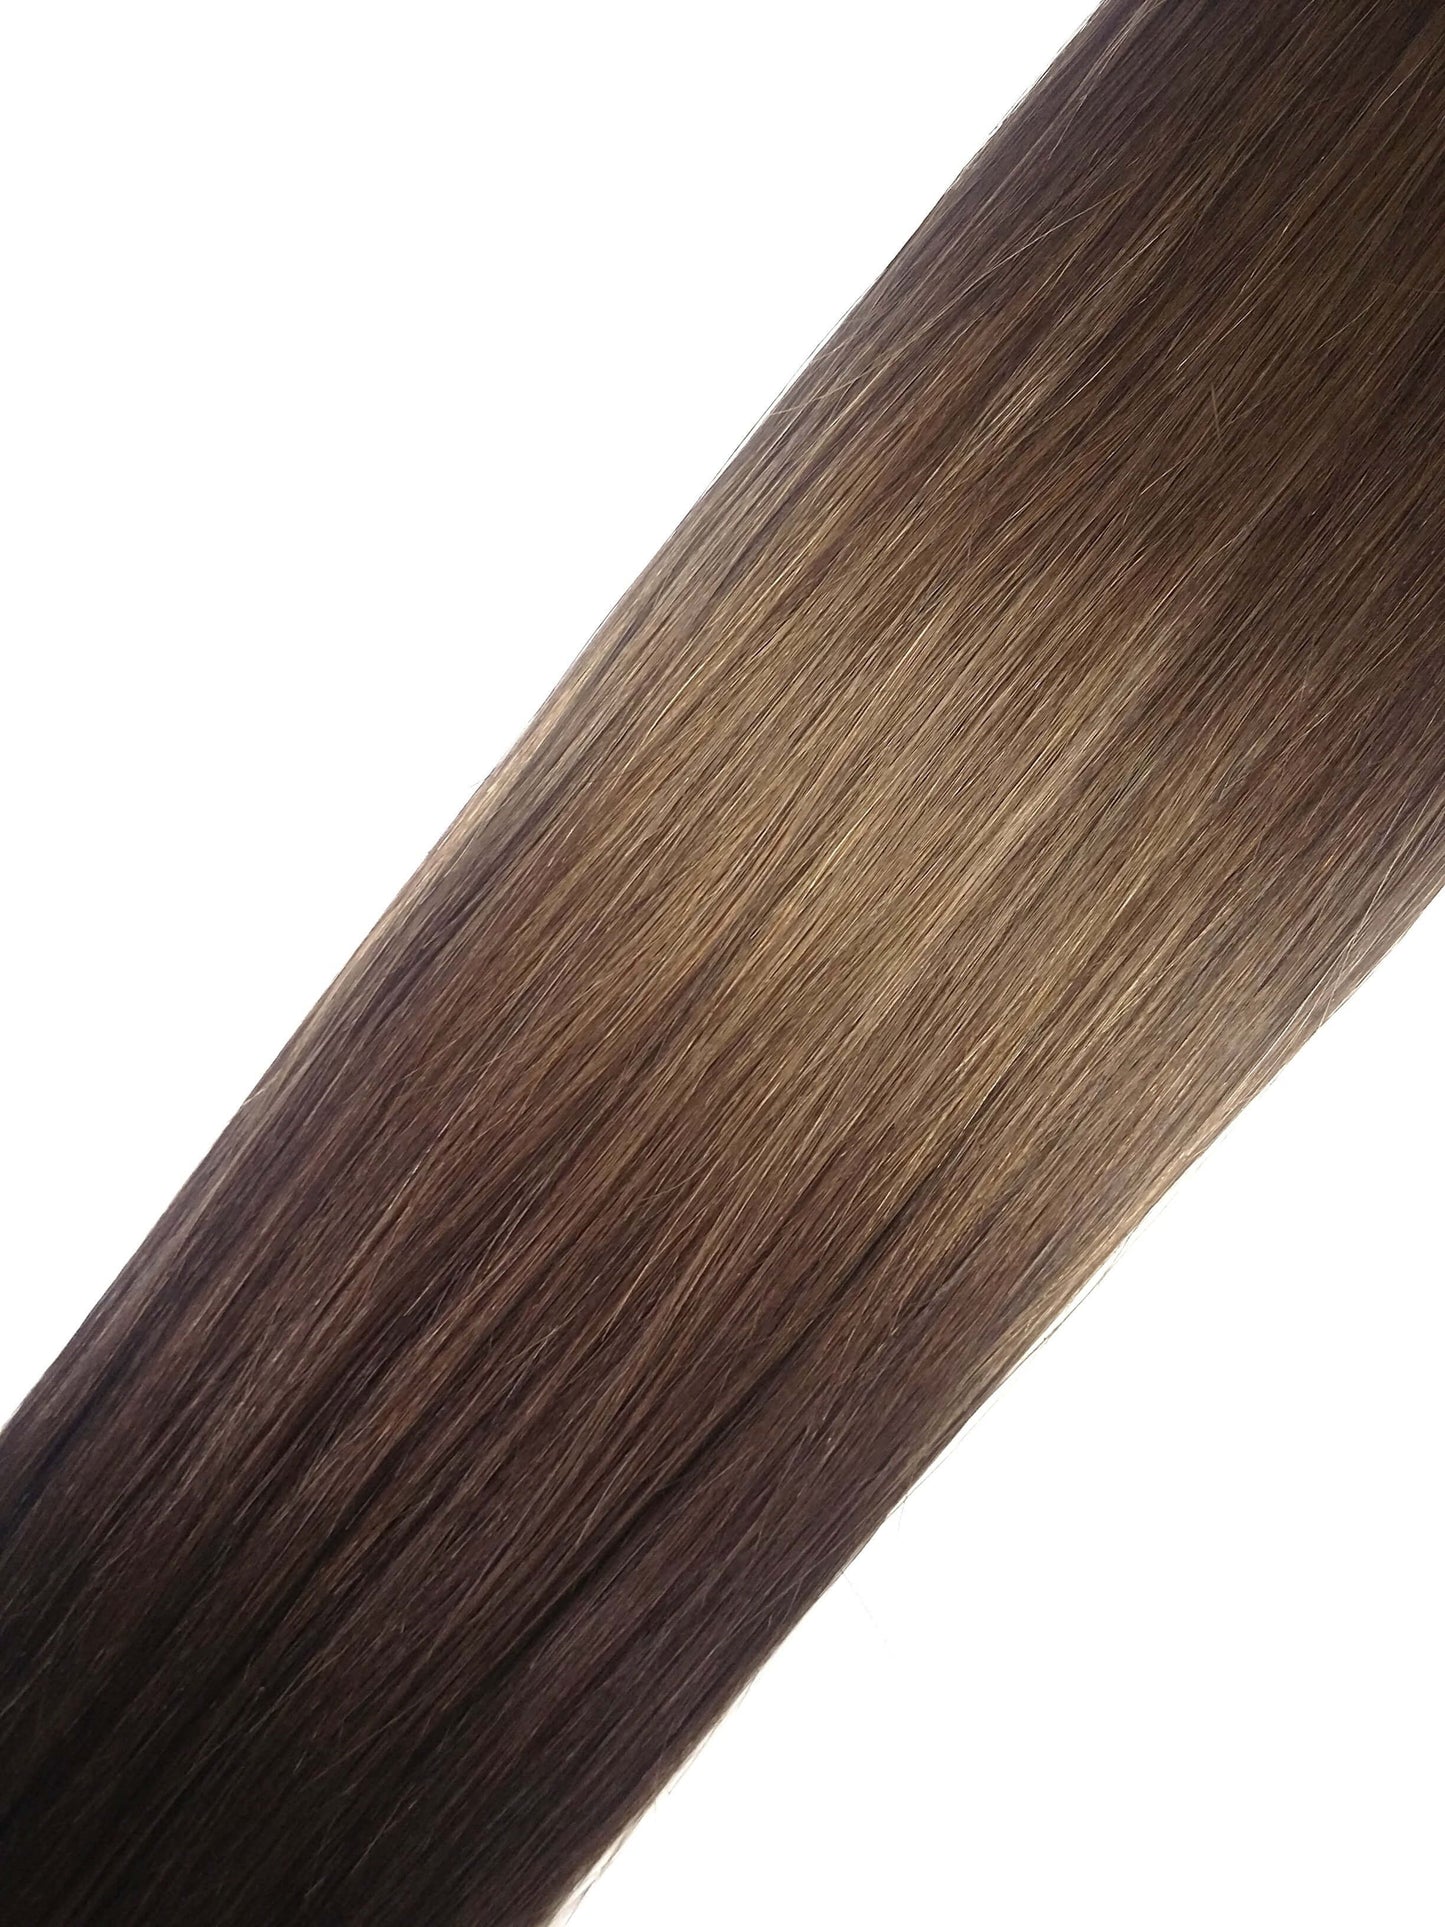 Brazilian Virgin Remy Human Hair - Wefts, 20'',Straight, Colour 3, 100g, Quick Shipping